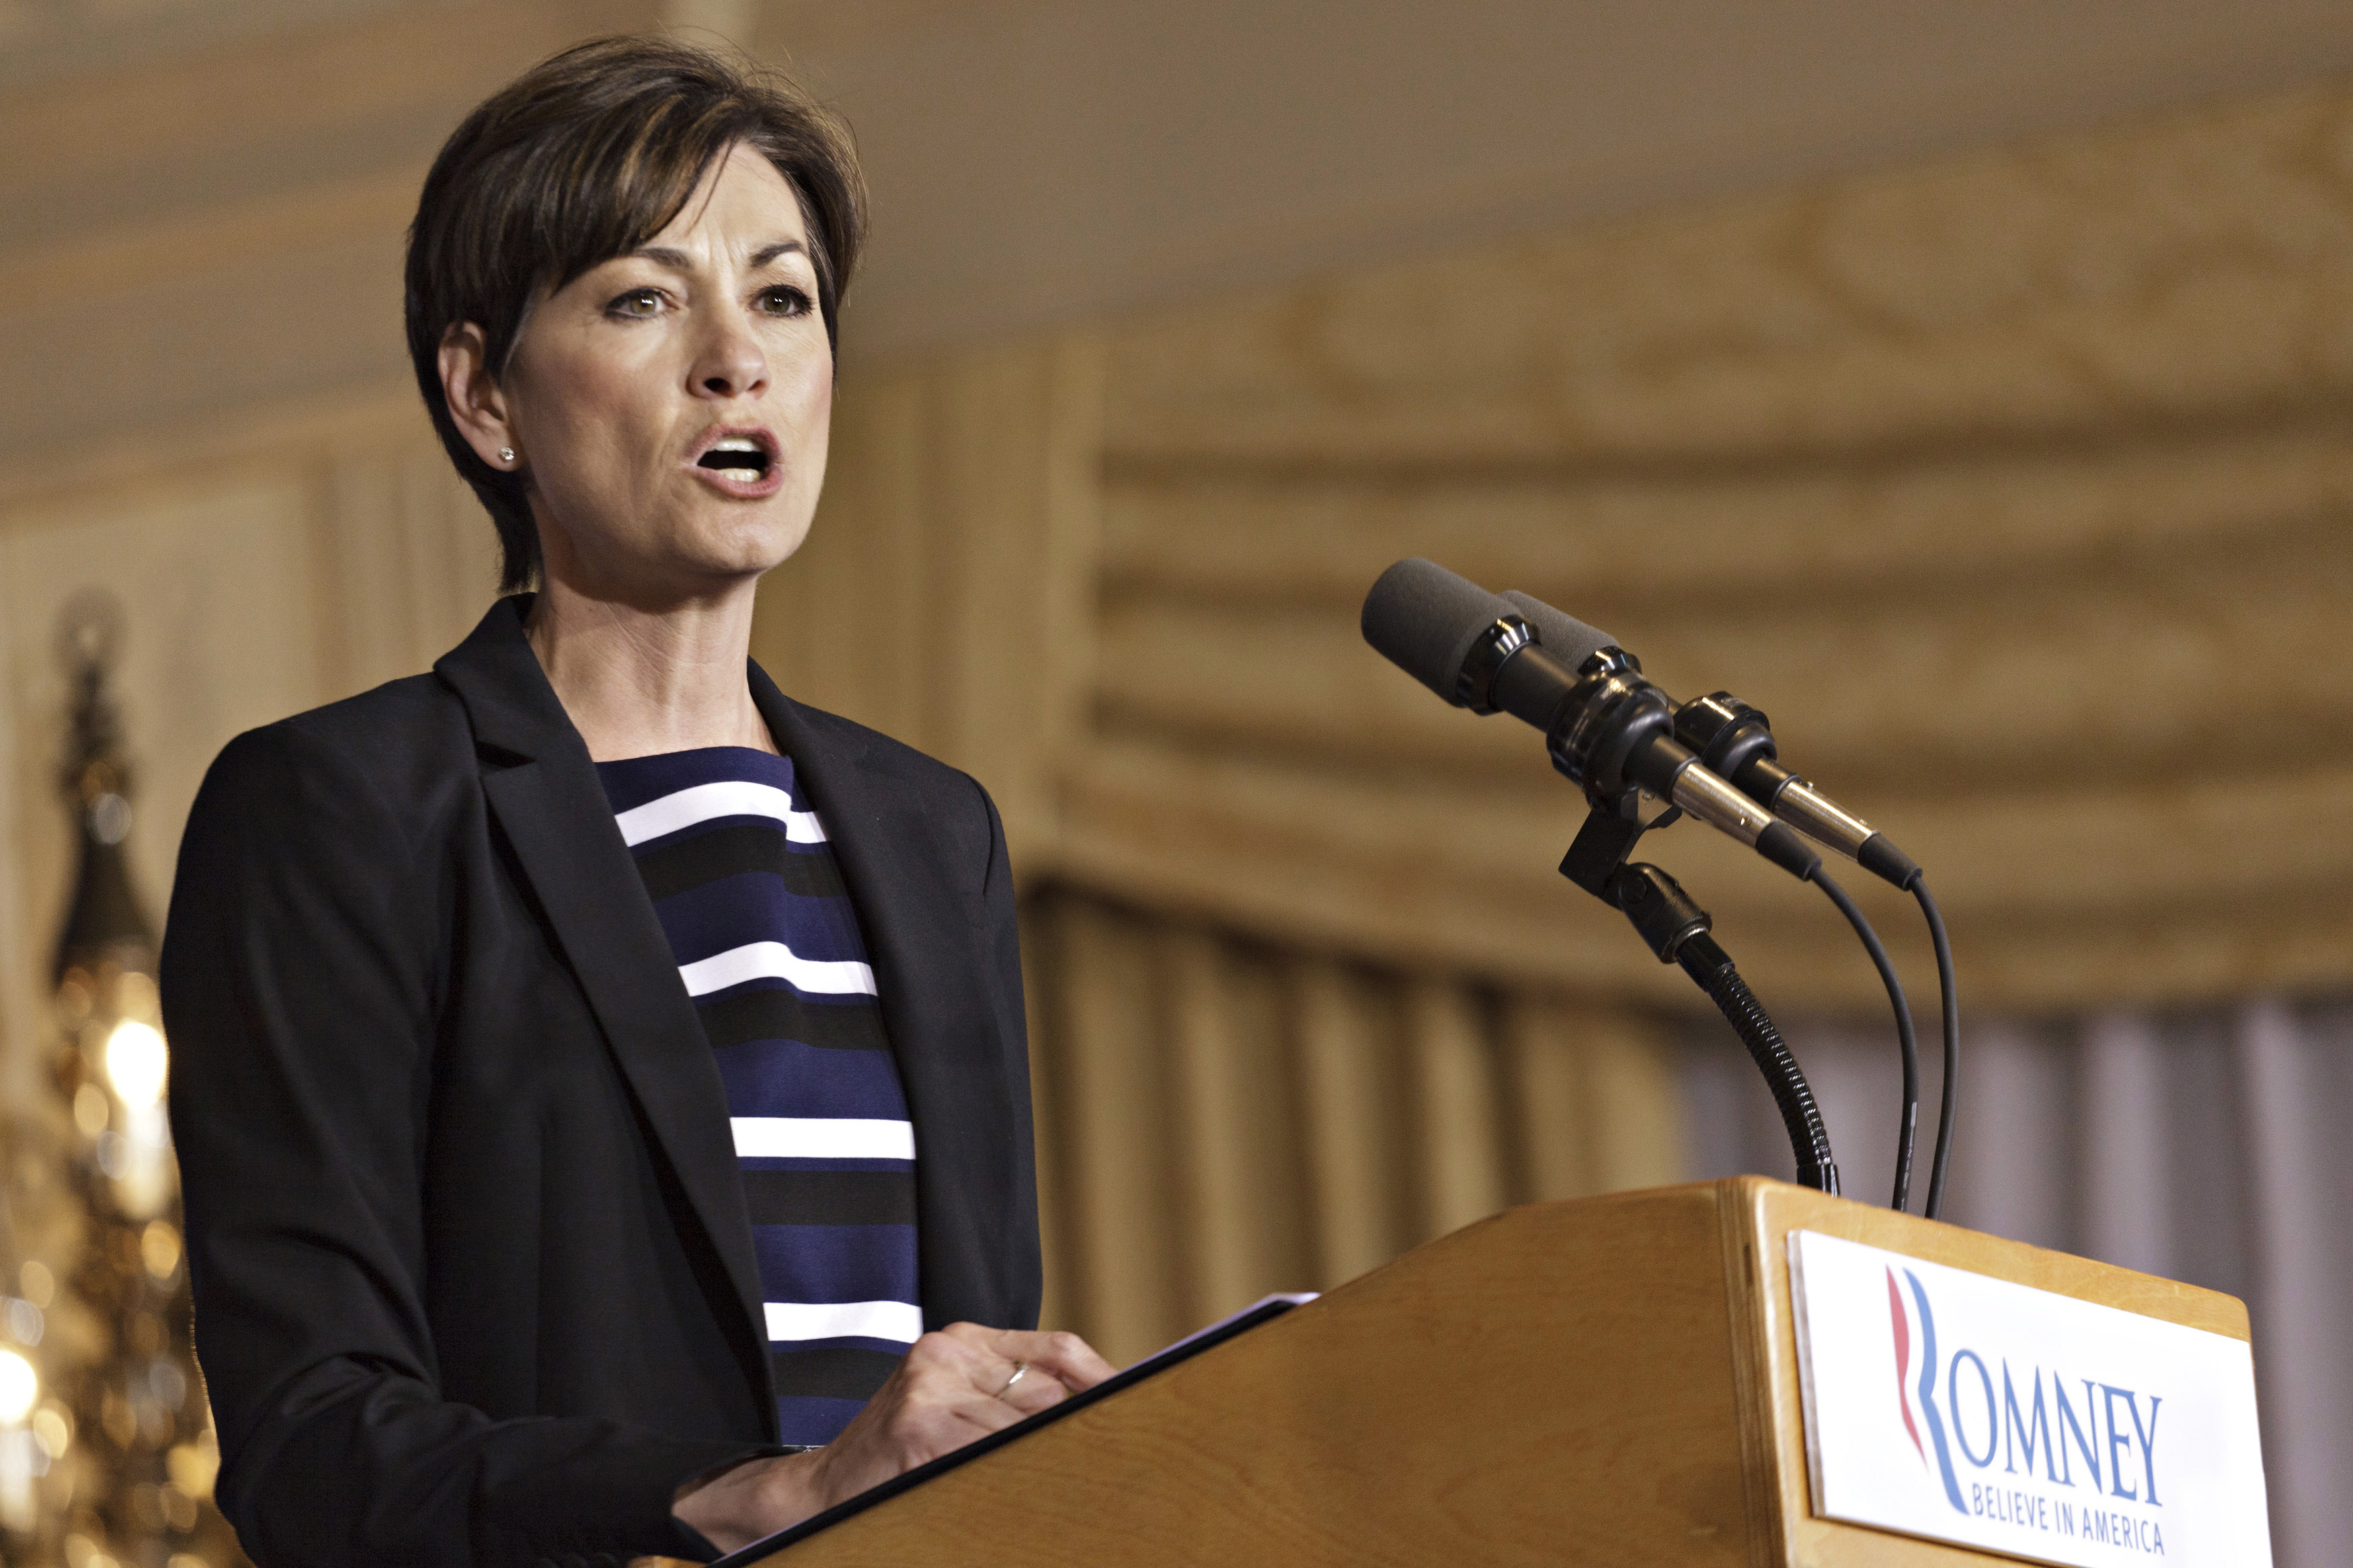 Iowa Lt. Gov. Kim Reynolds speaks to supporters of U.S. Republican presidential candidate and former Massachusetts governor Mitt Romney at Hotel Fort Des Moines in Des Moines, Iowa May 15, 2012. REUTERS/Brian C. Frank